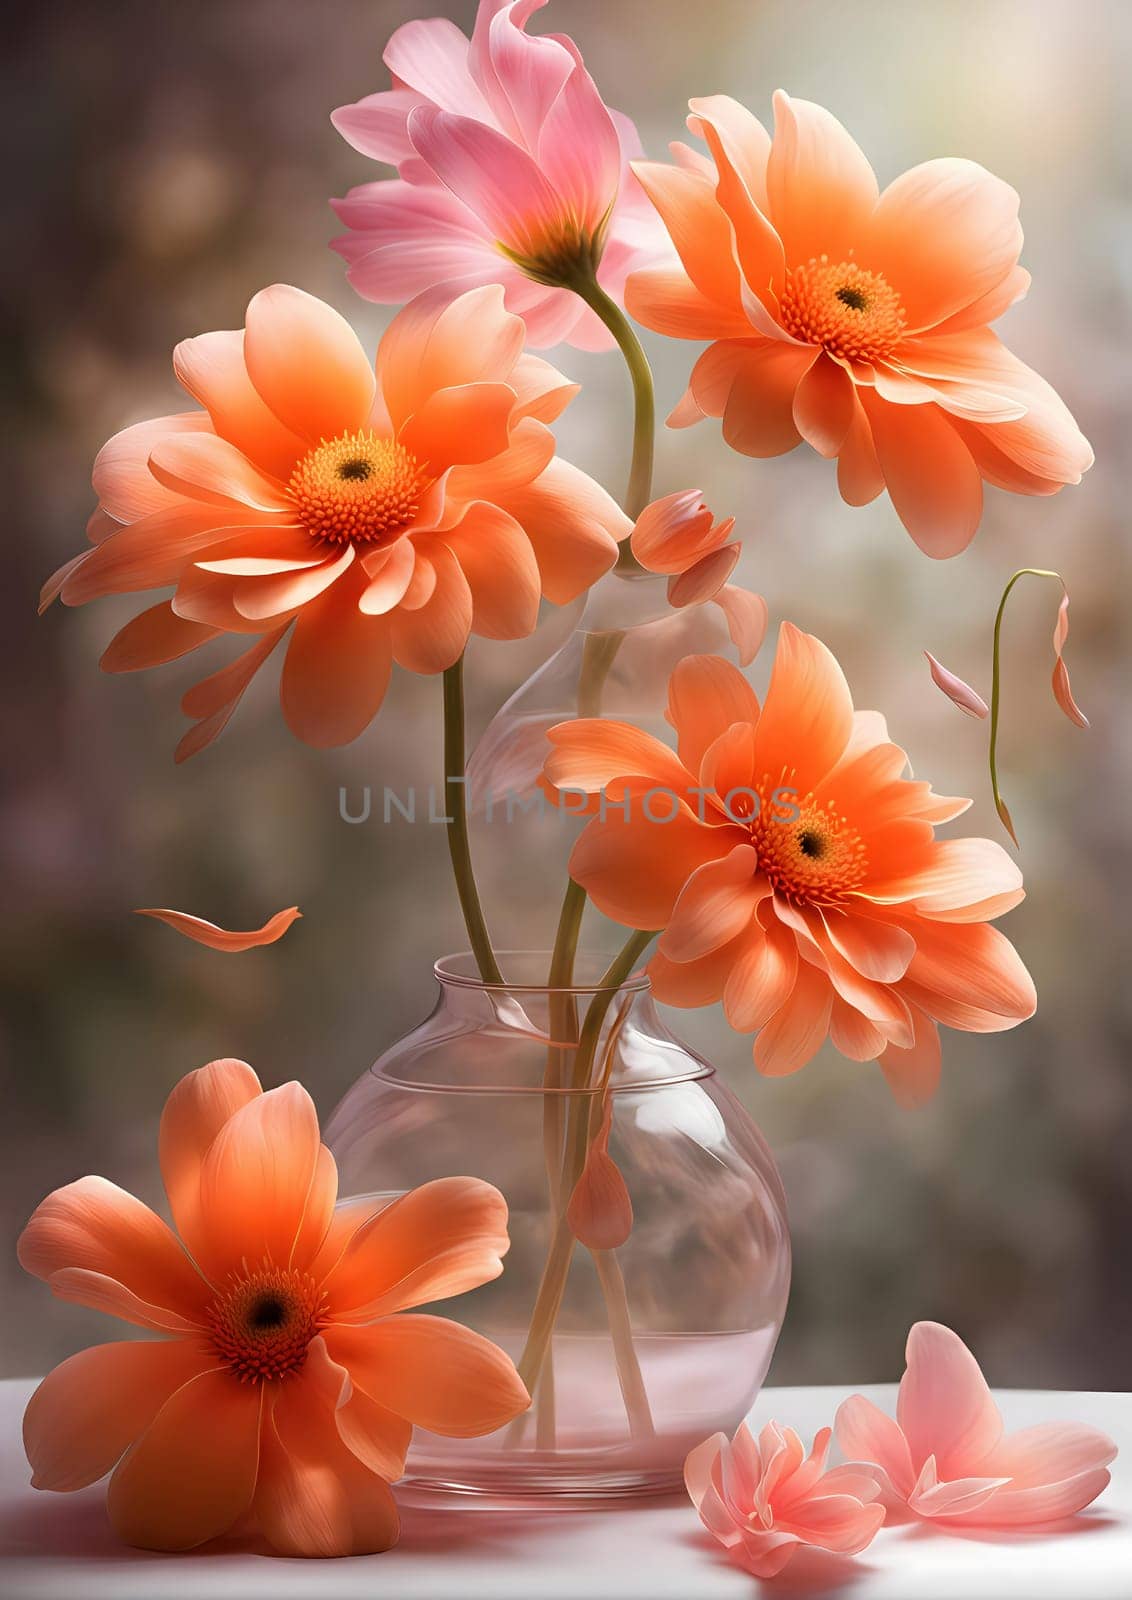 there are two orange flowers that are in a vase, soft shading of the image, pink petals are flying, large semi-transparent flowers, very very well detailed image, flowers, clean image, by rostik924